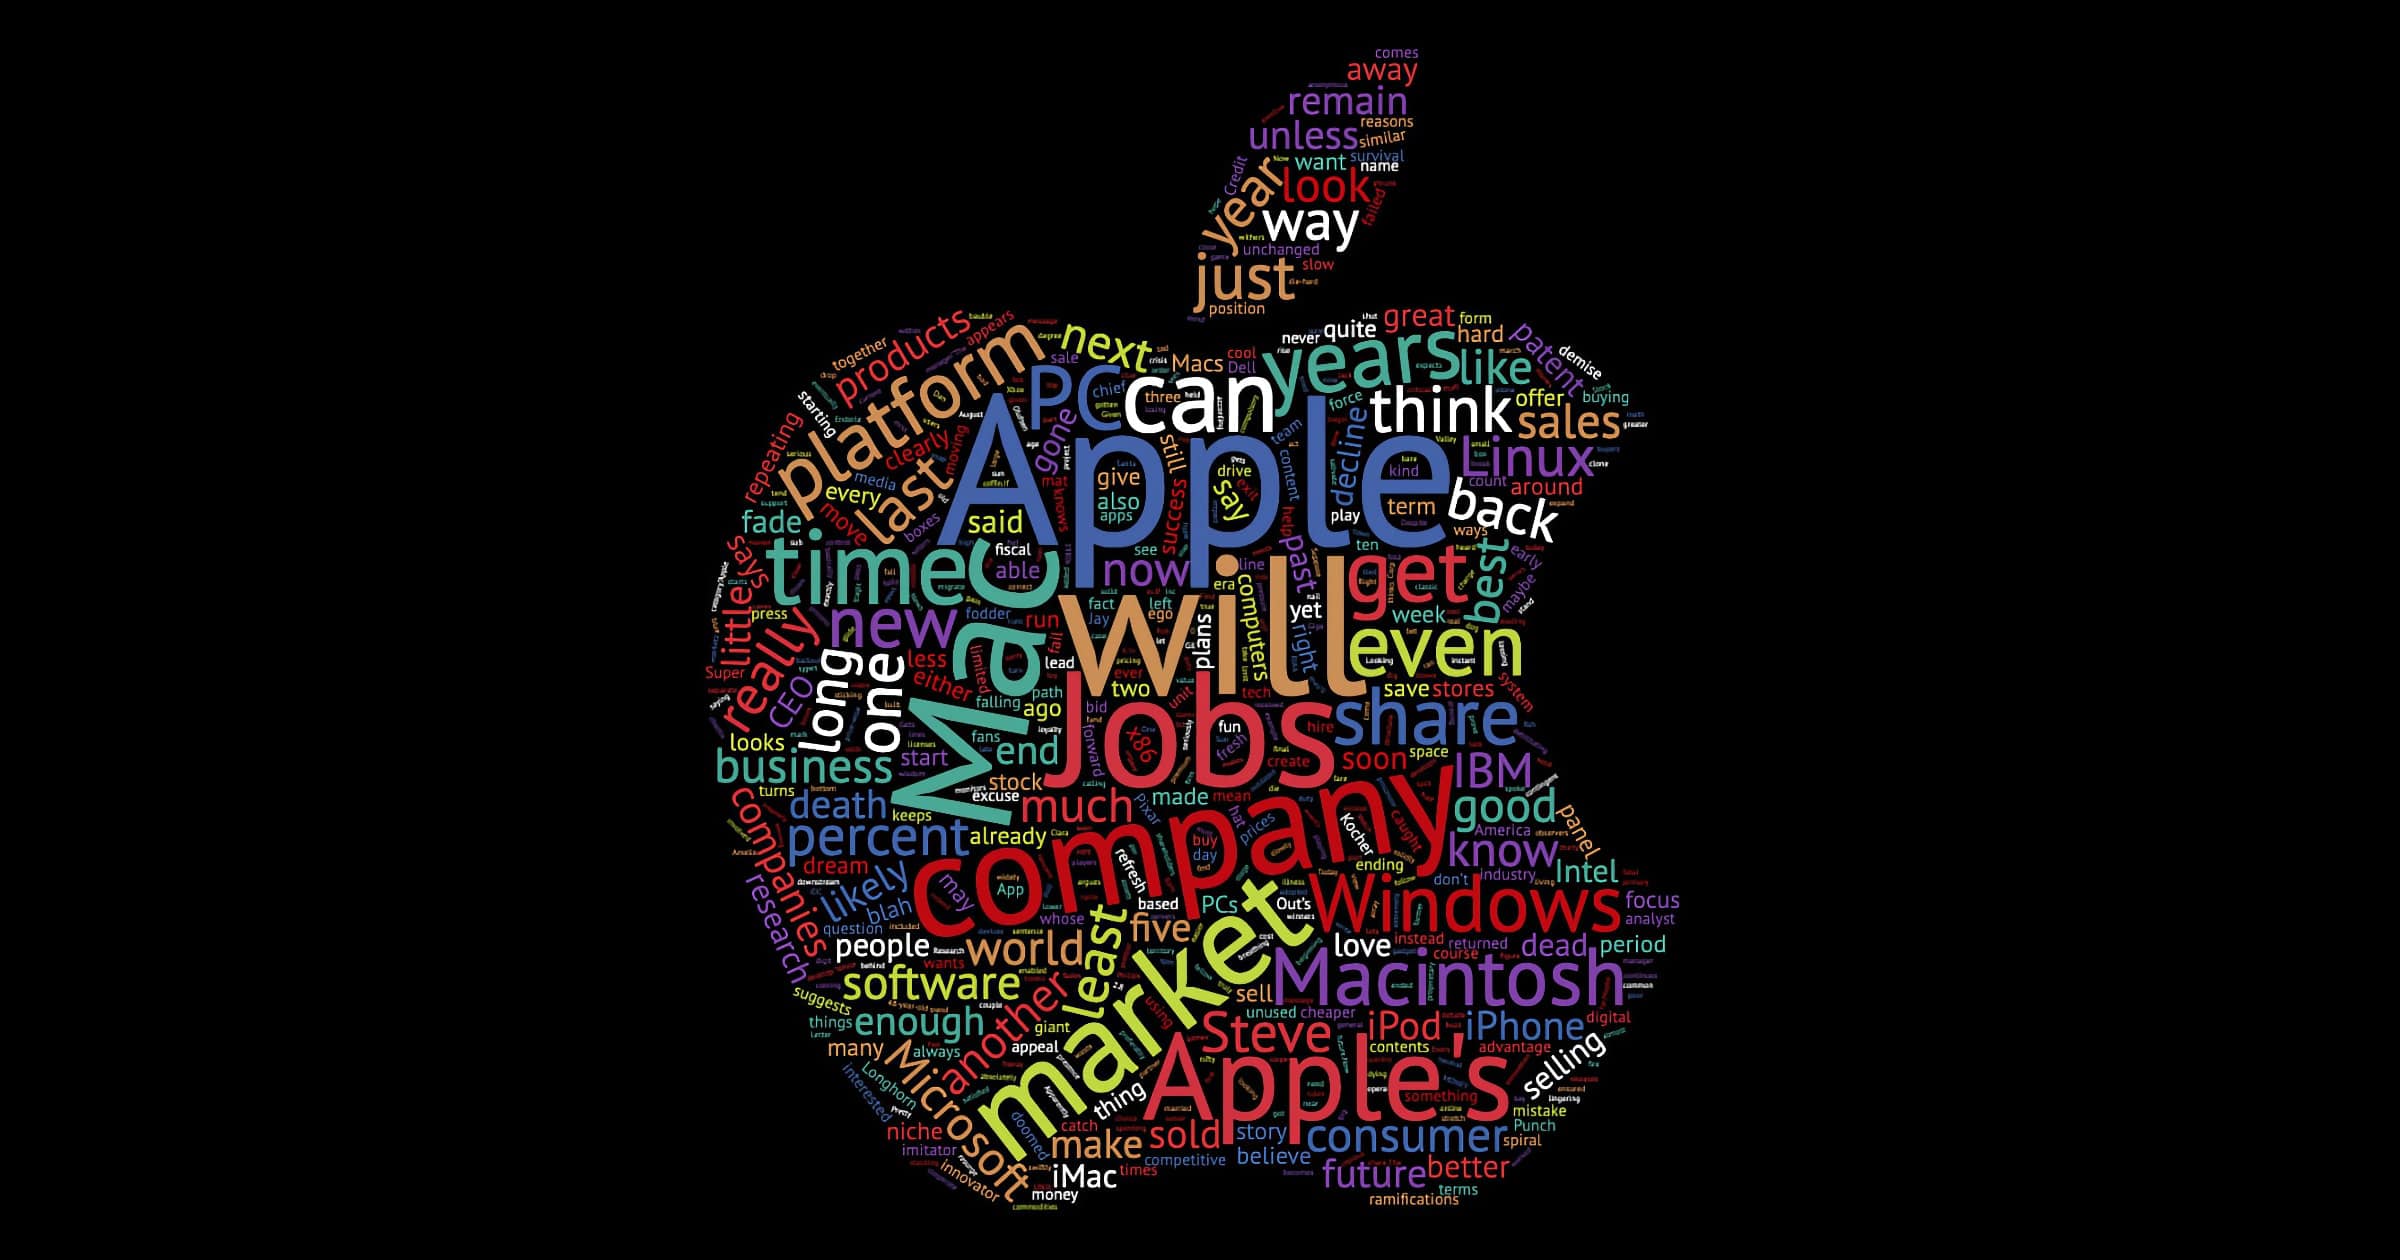 Visualizing the 71 Times Pundits Have Declared Apple Dead